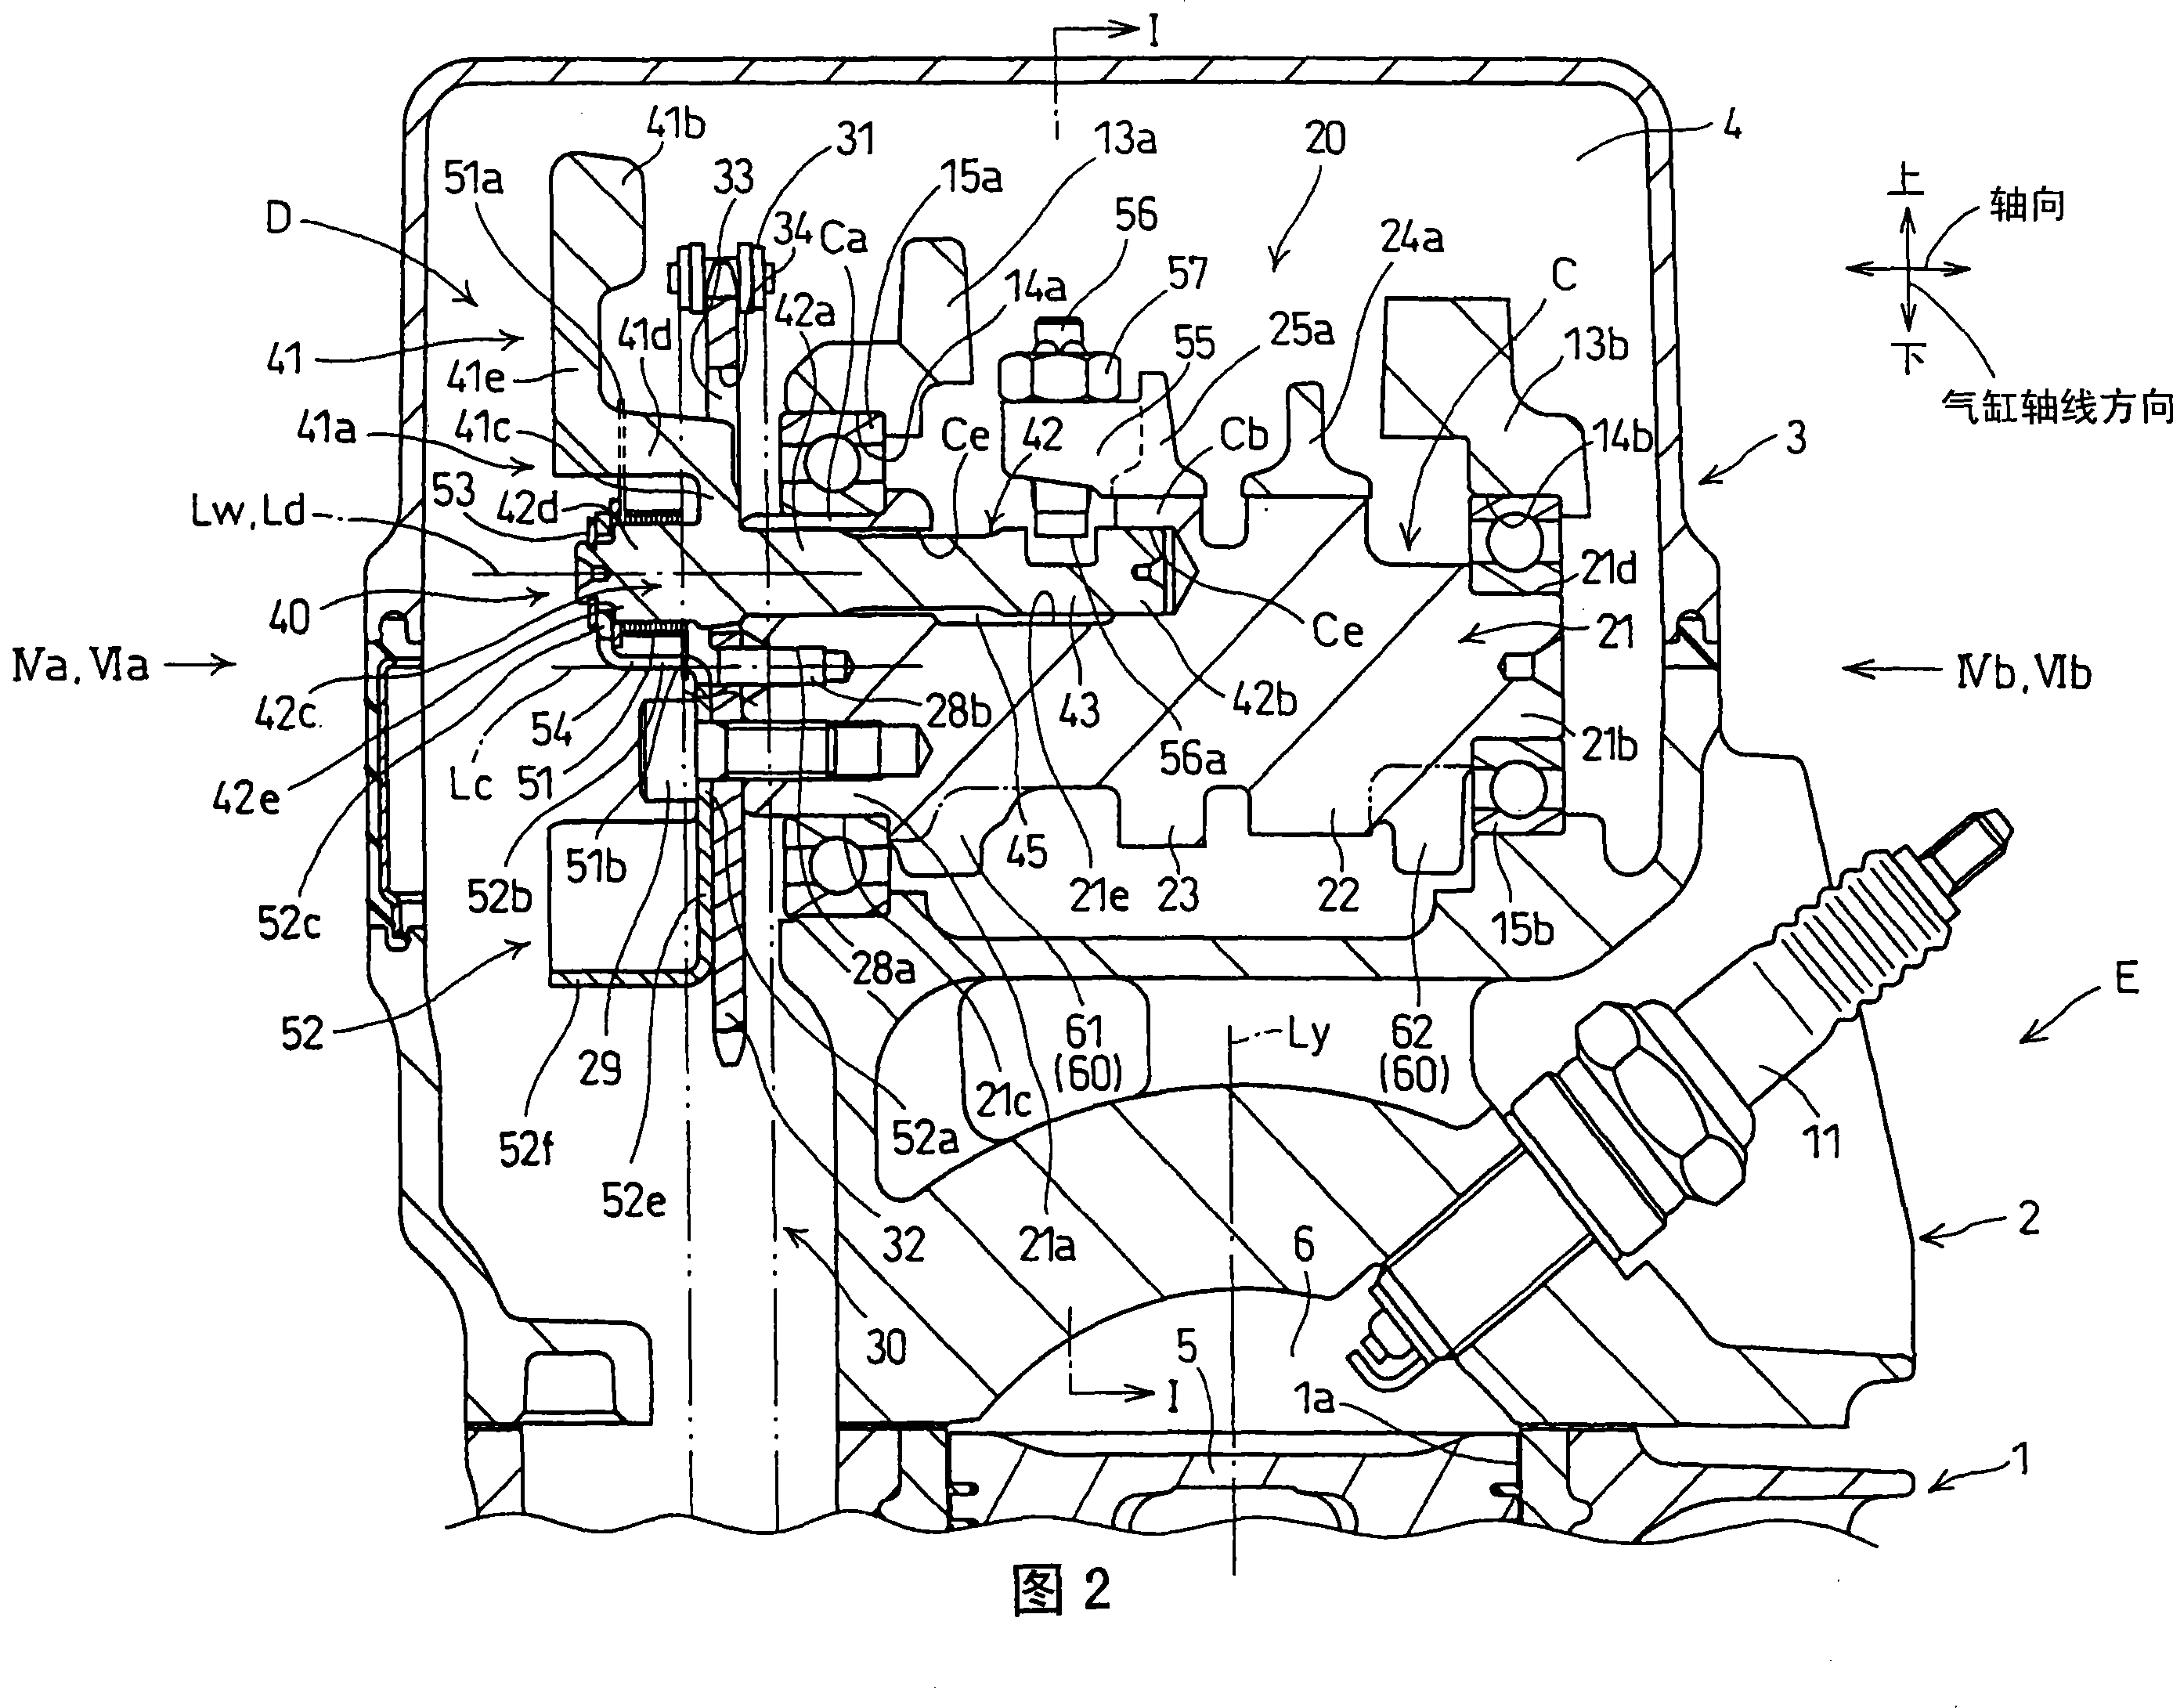 Internal-combustion engine with decompressor